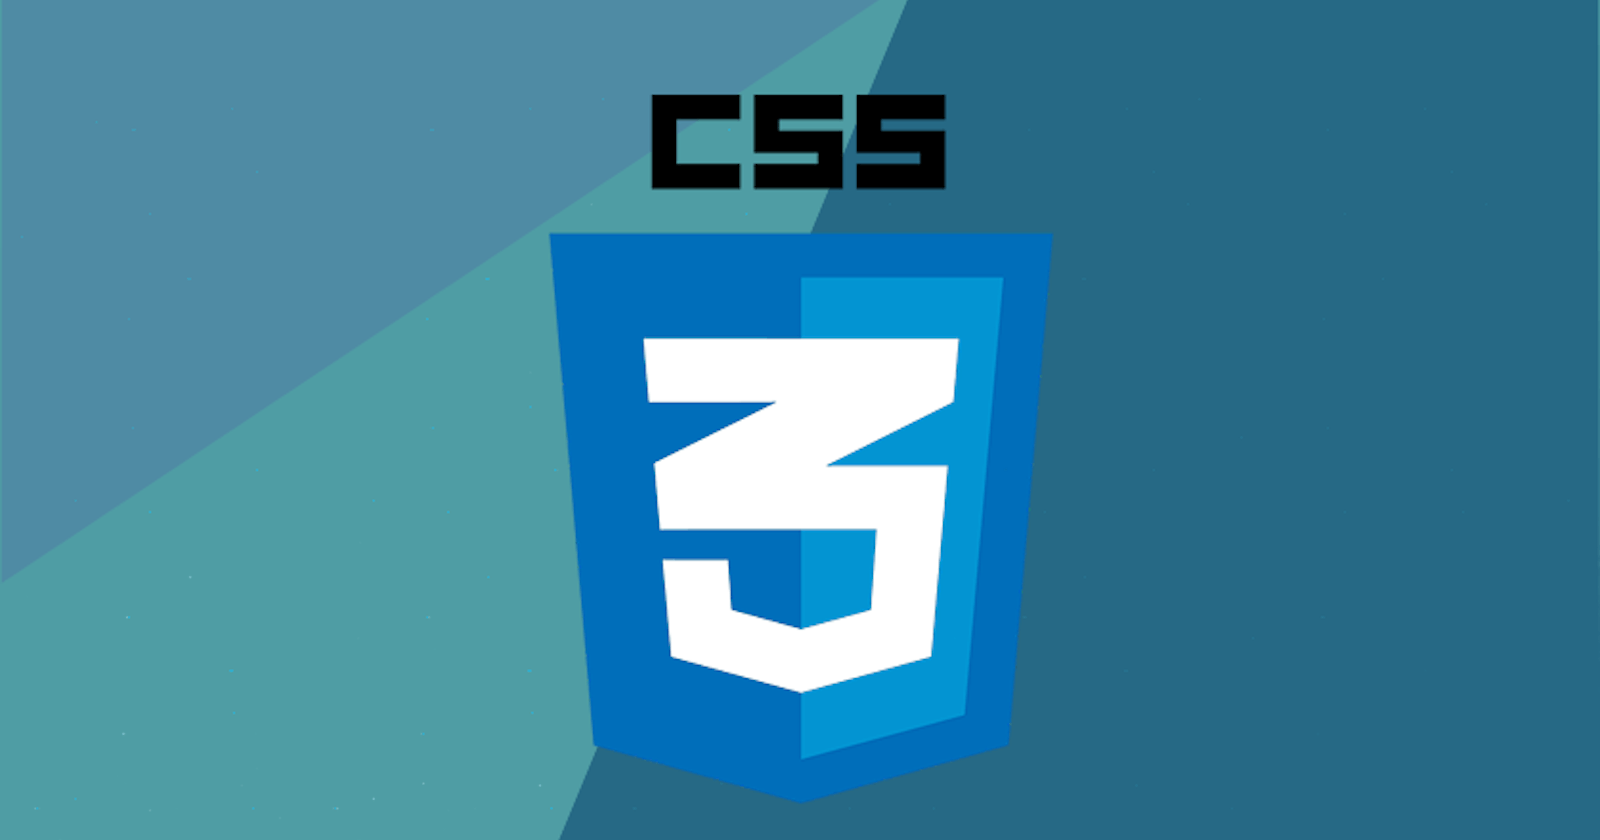 z-index in CSS